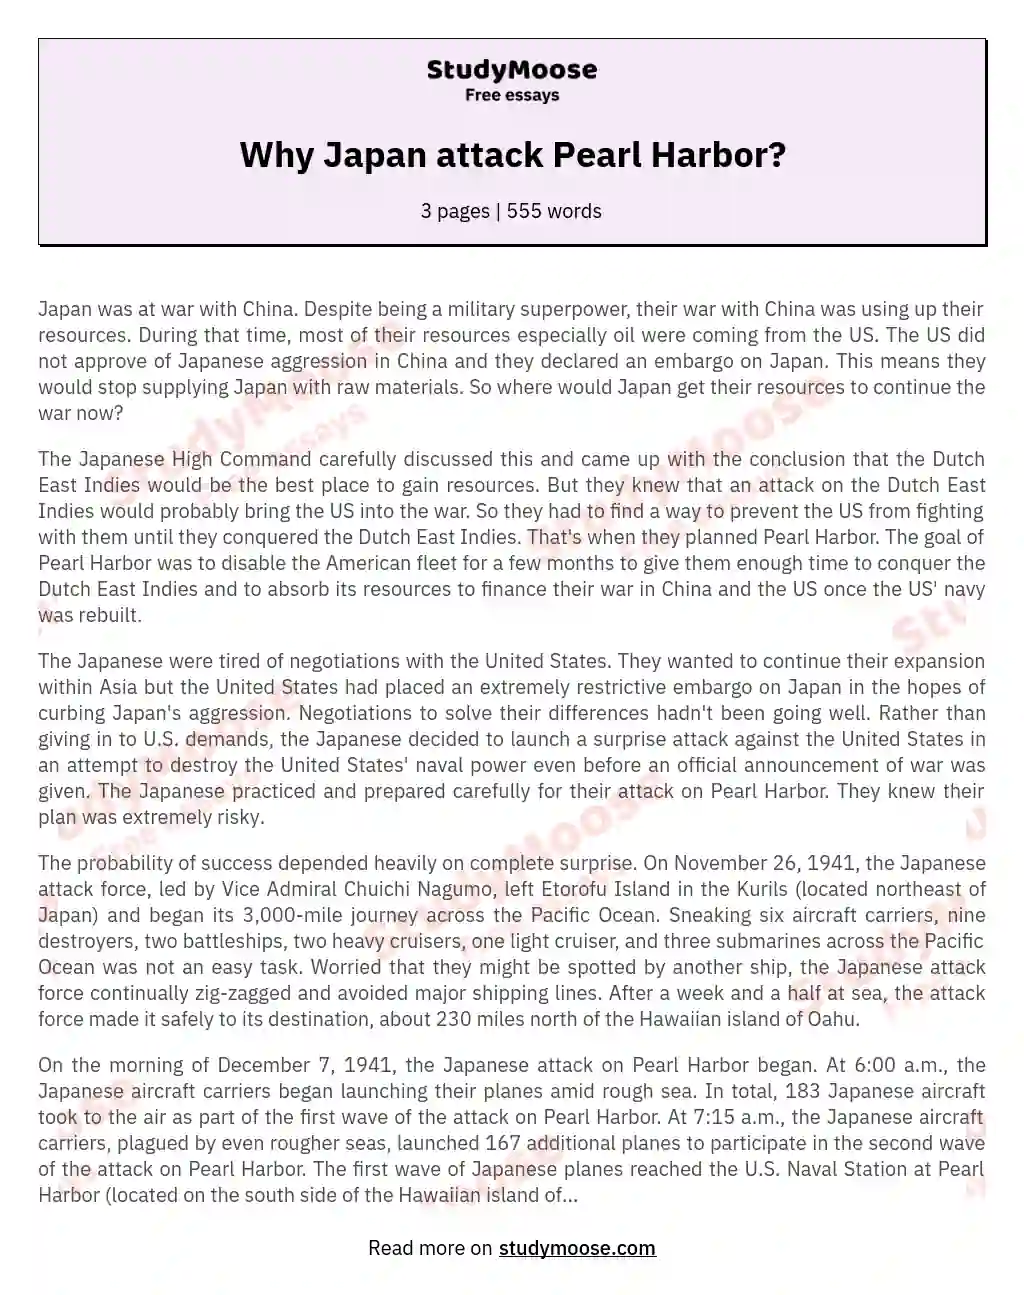 Why Japan attack Pearl Harbor? essay